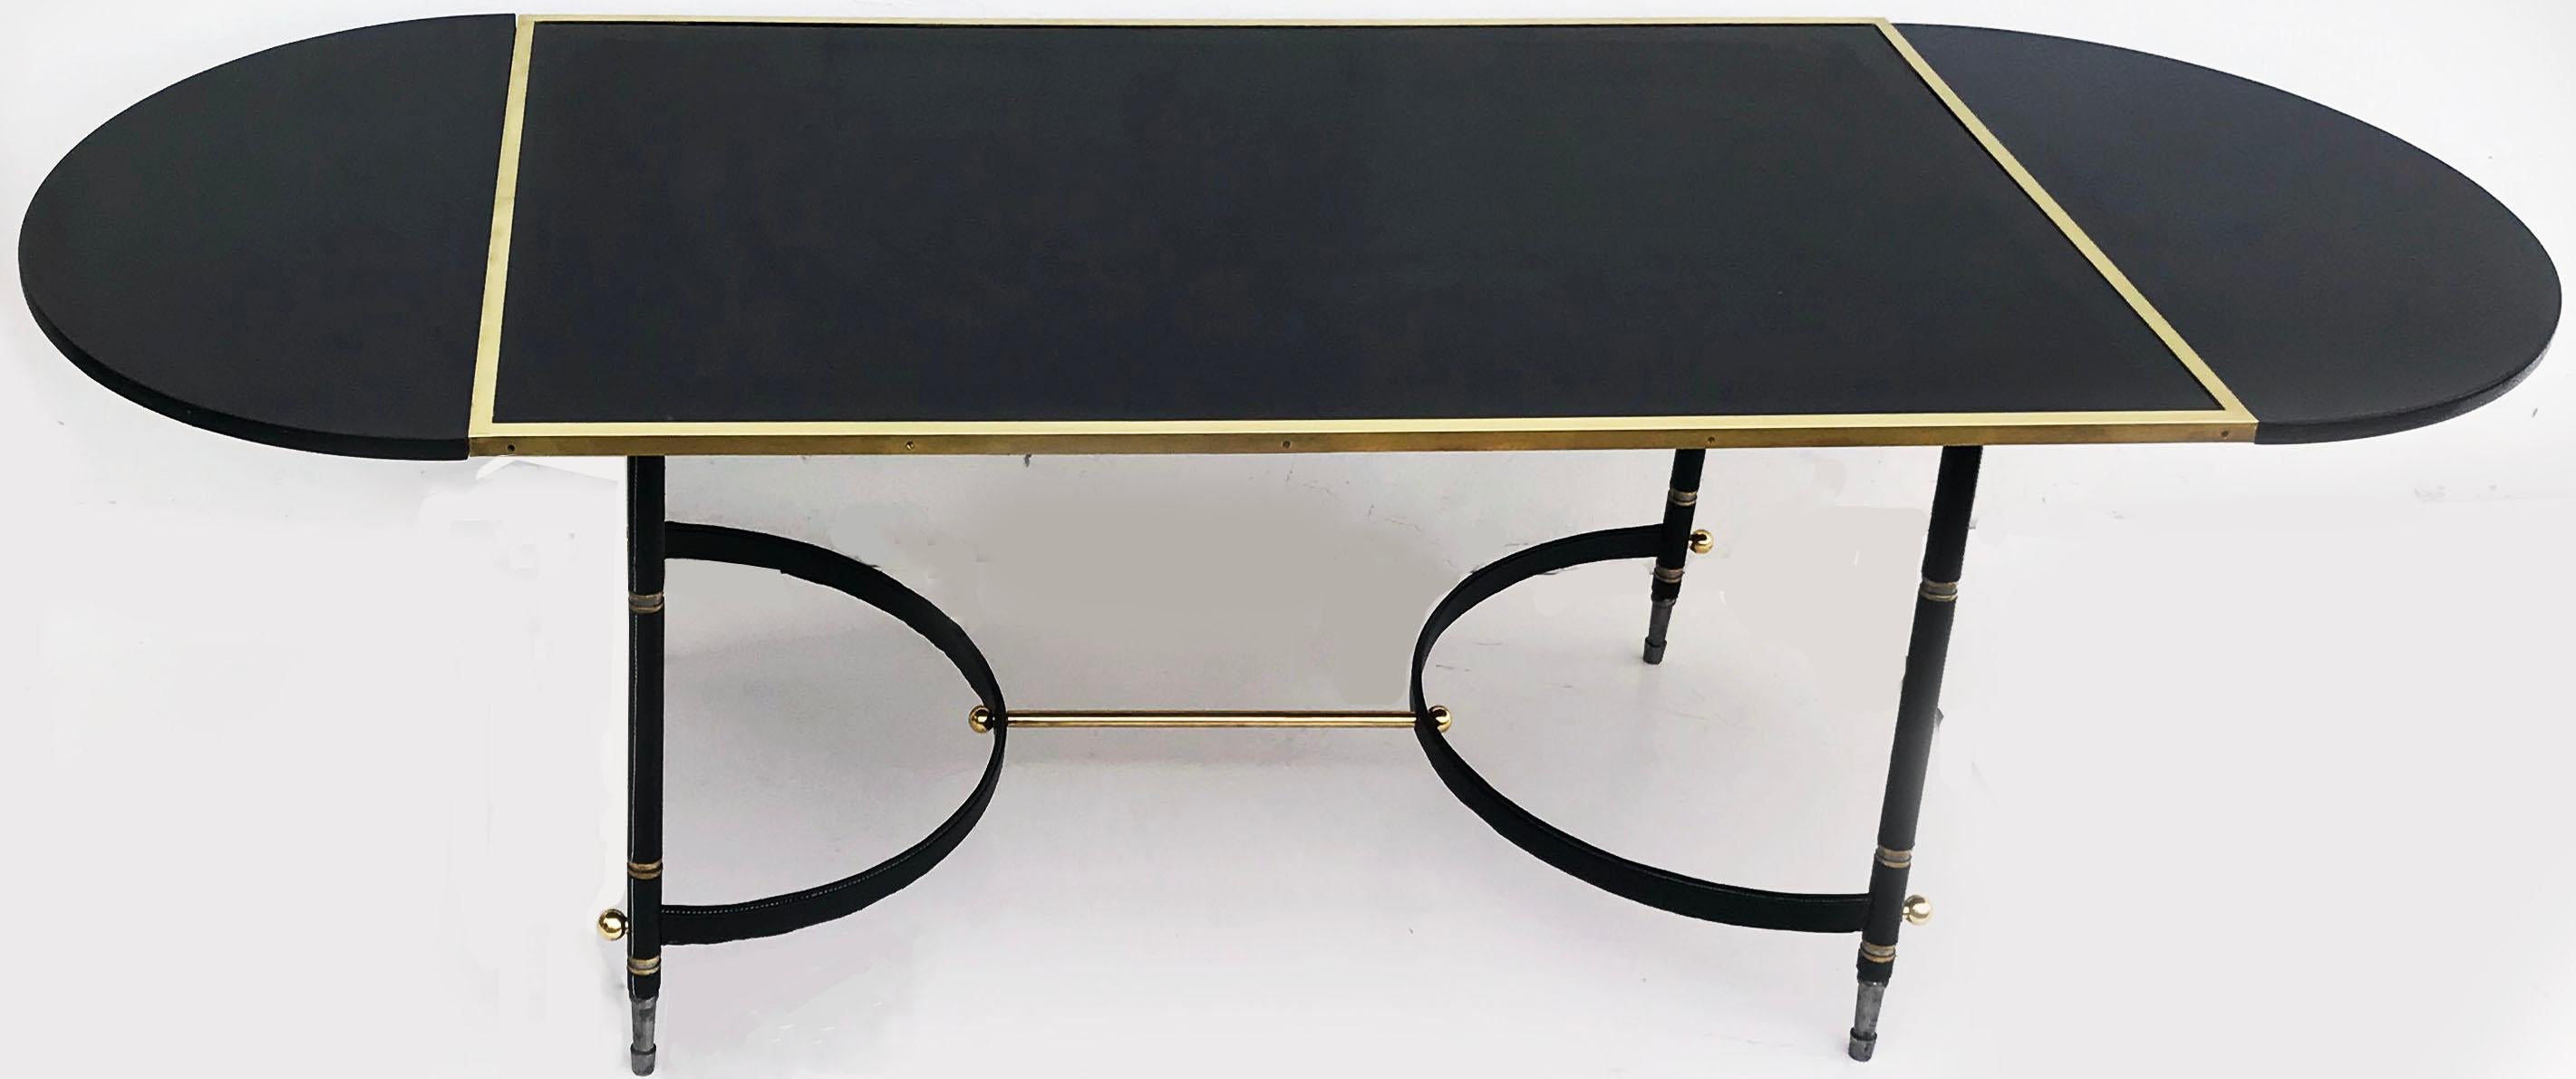 Superb Art Deco Jacques Adnet Dining Table or Desk made out of Steel, Brass and Leather.
Newly restored, 2 additional leaves available.
Stunning French Craftsmanship. 